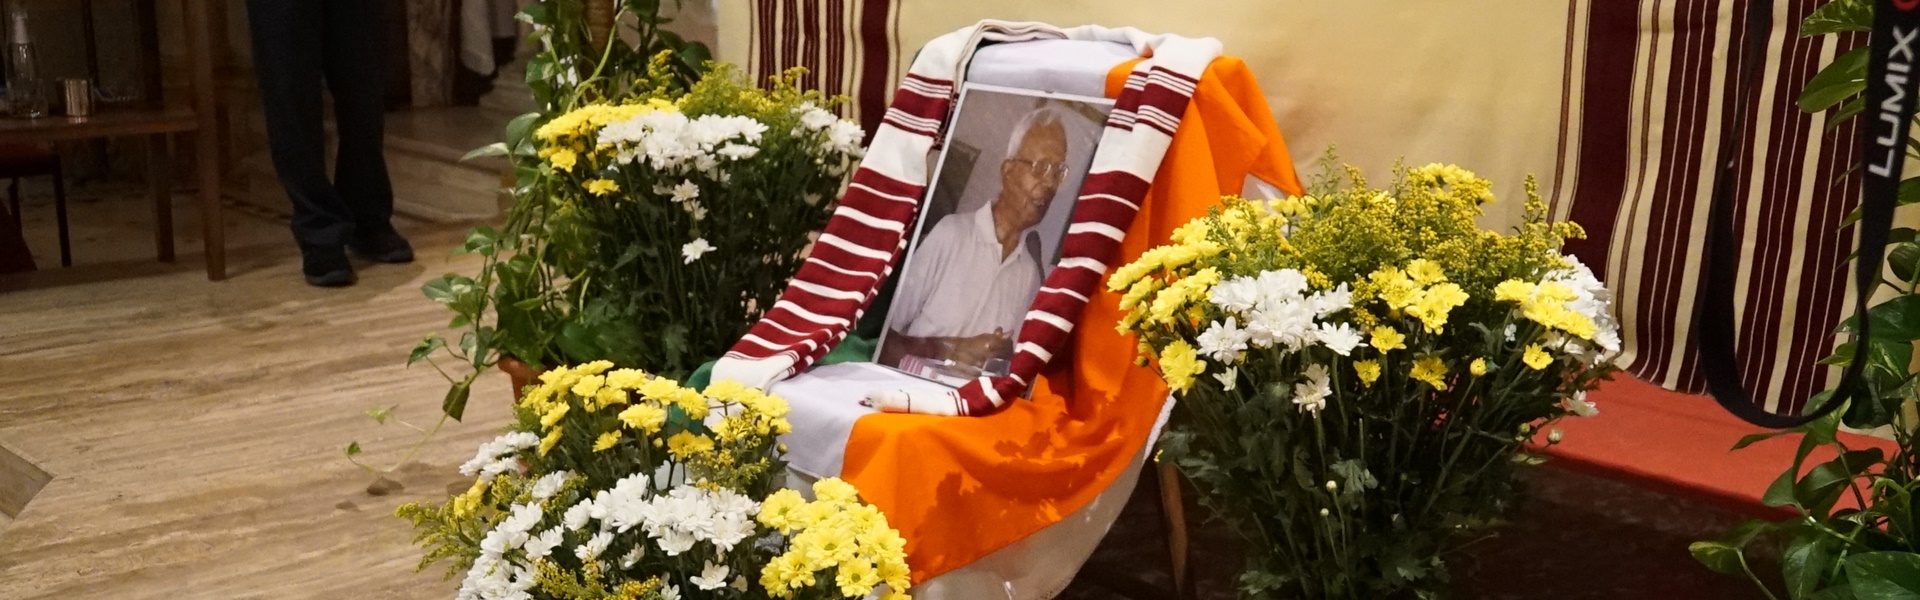 The life of Fr Stan Swamy celebrated in Rome